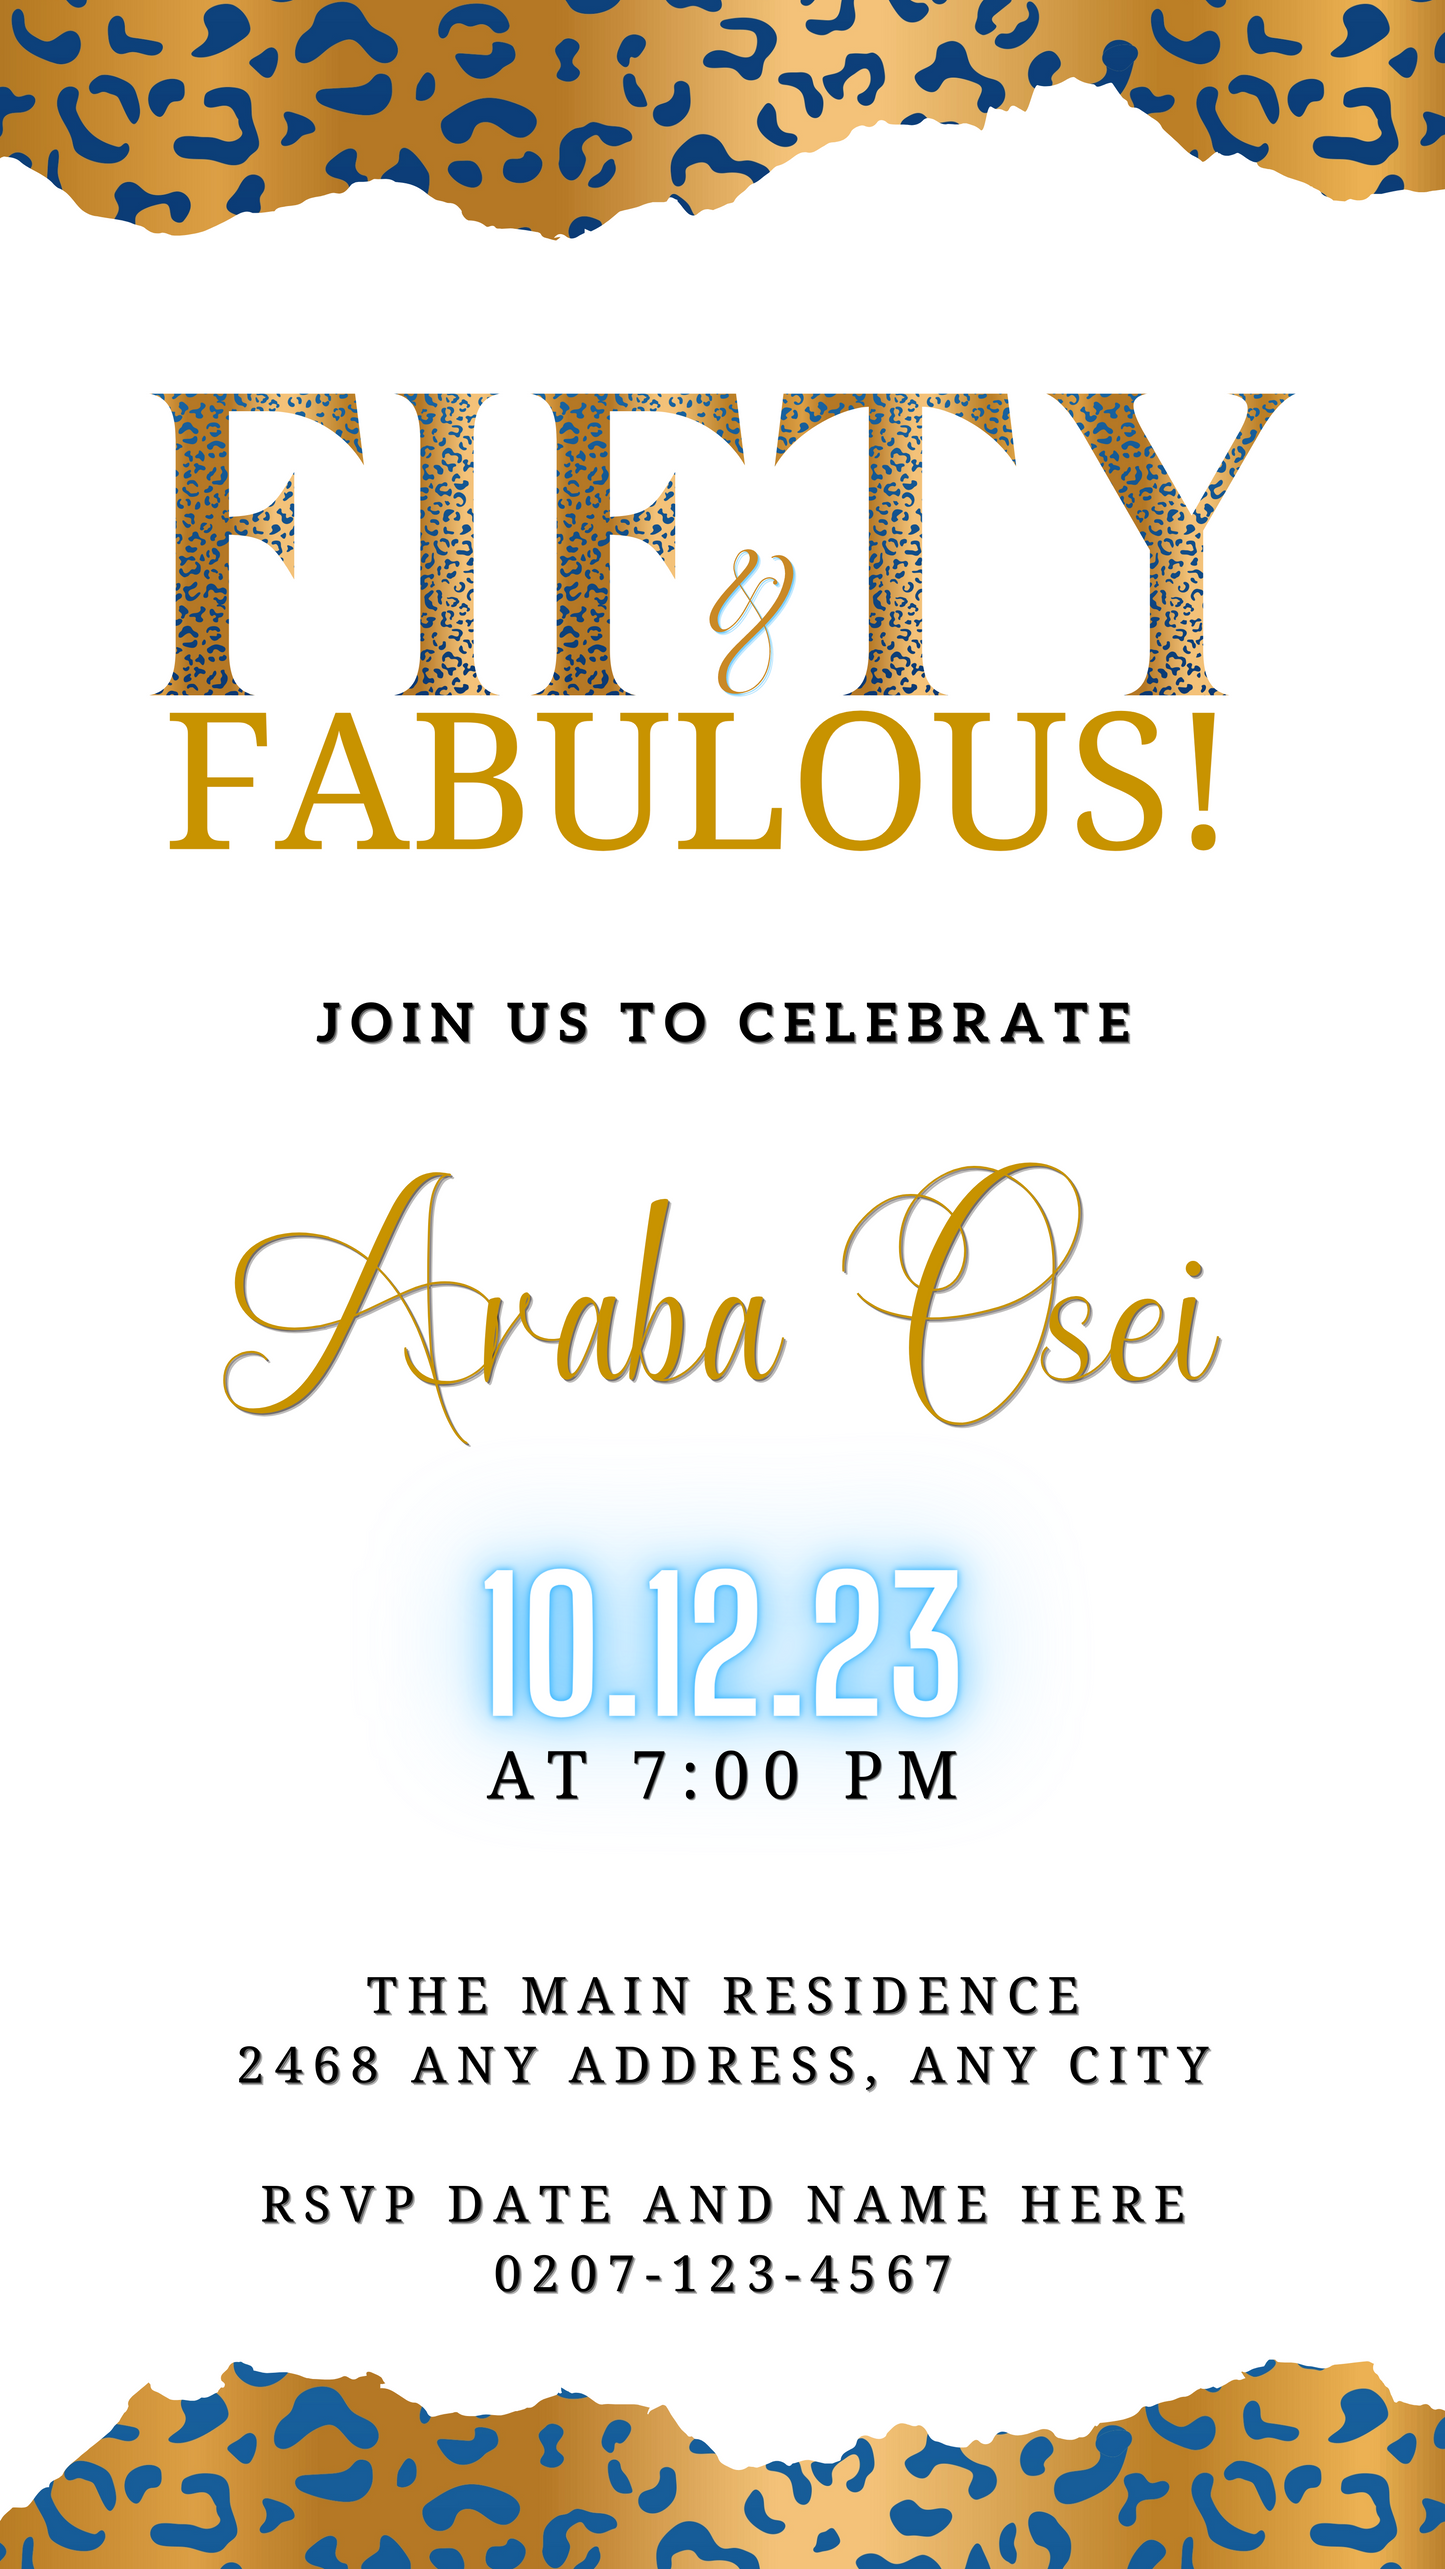 Digital invitation template featuring Neon Gold Blue White Leopard | 50 & Fabulous text, customizable via Canva for smartphone use.